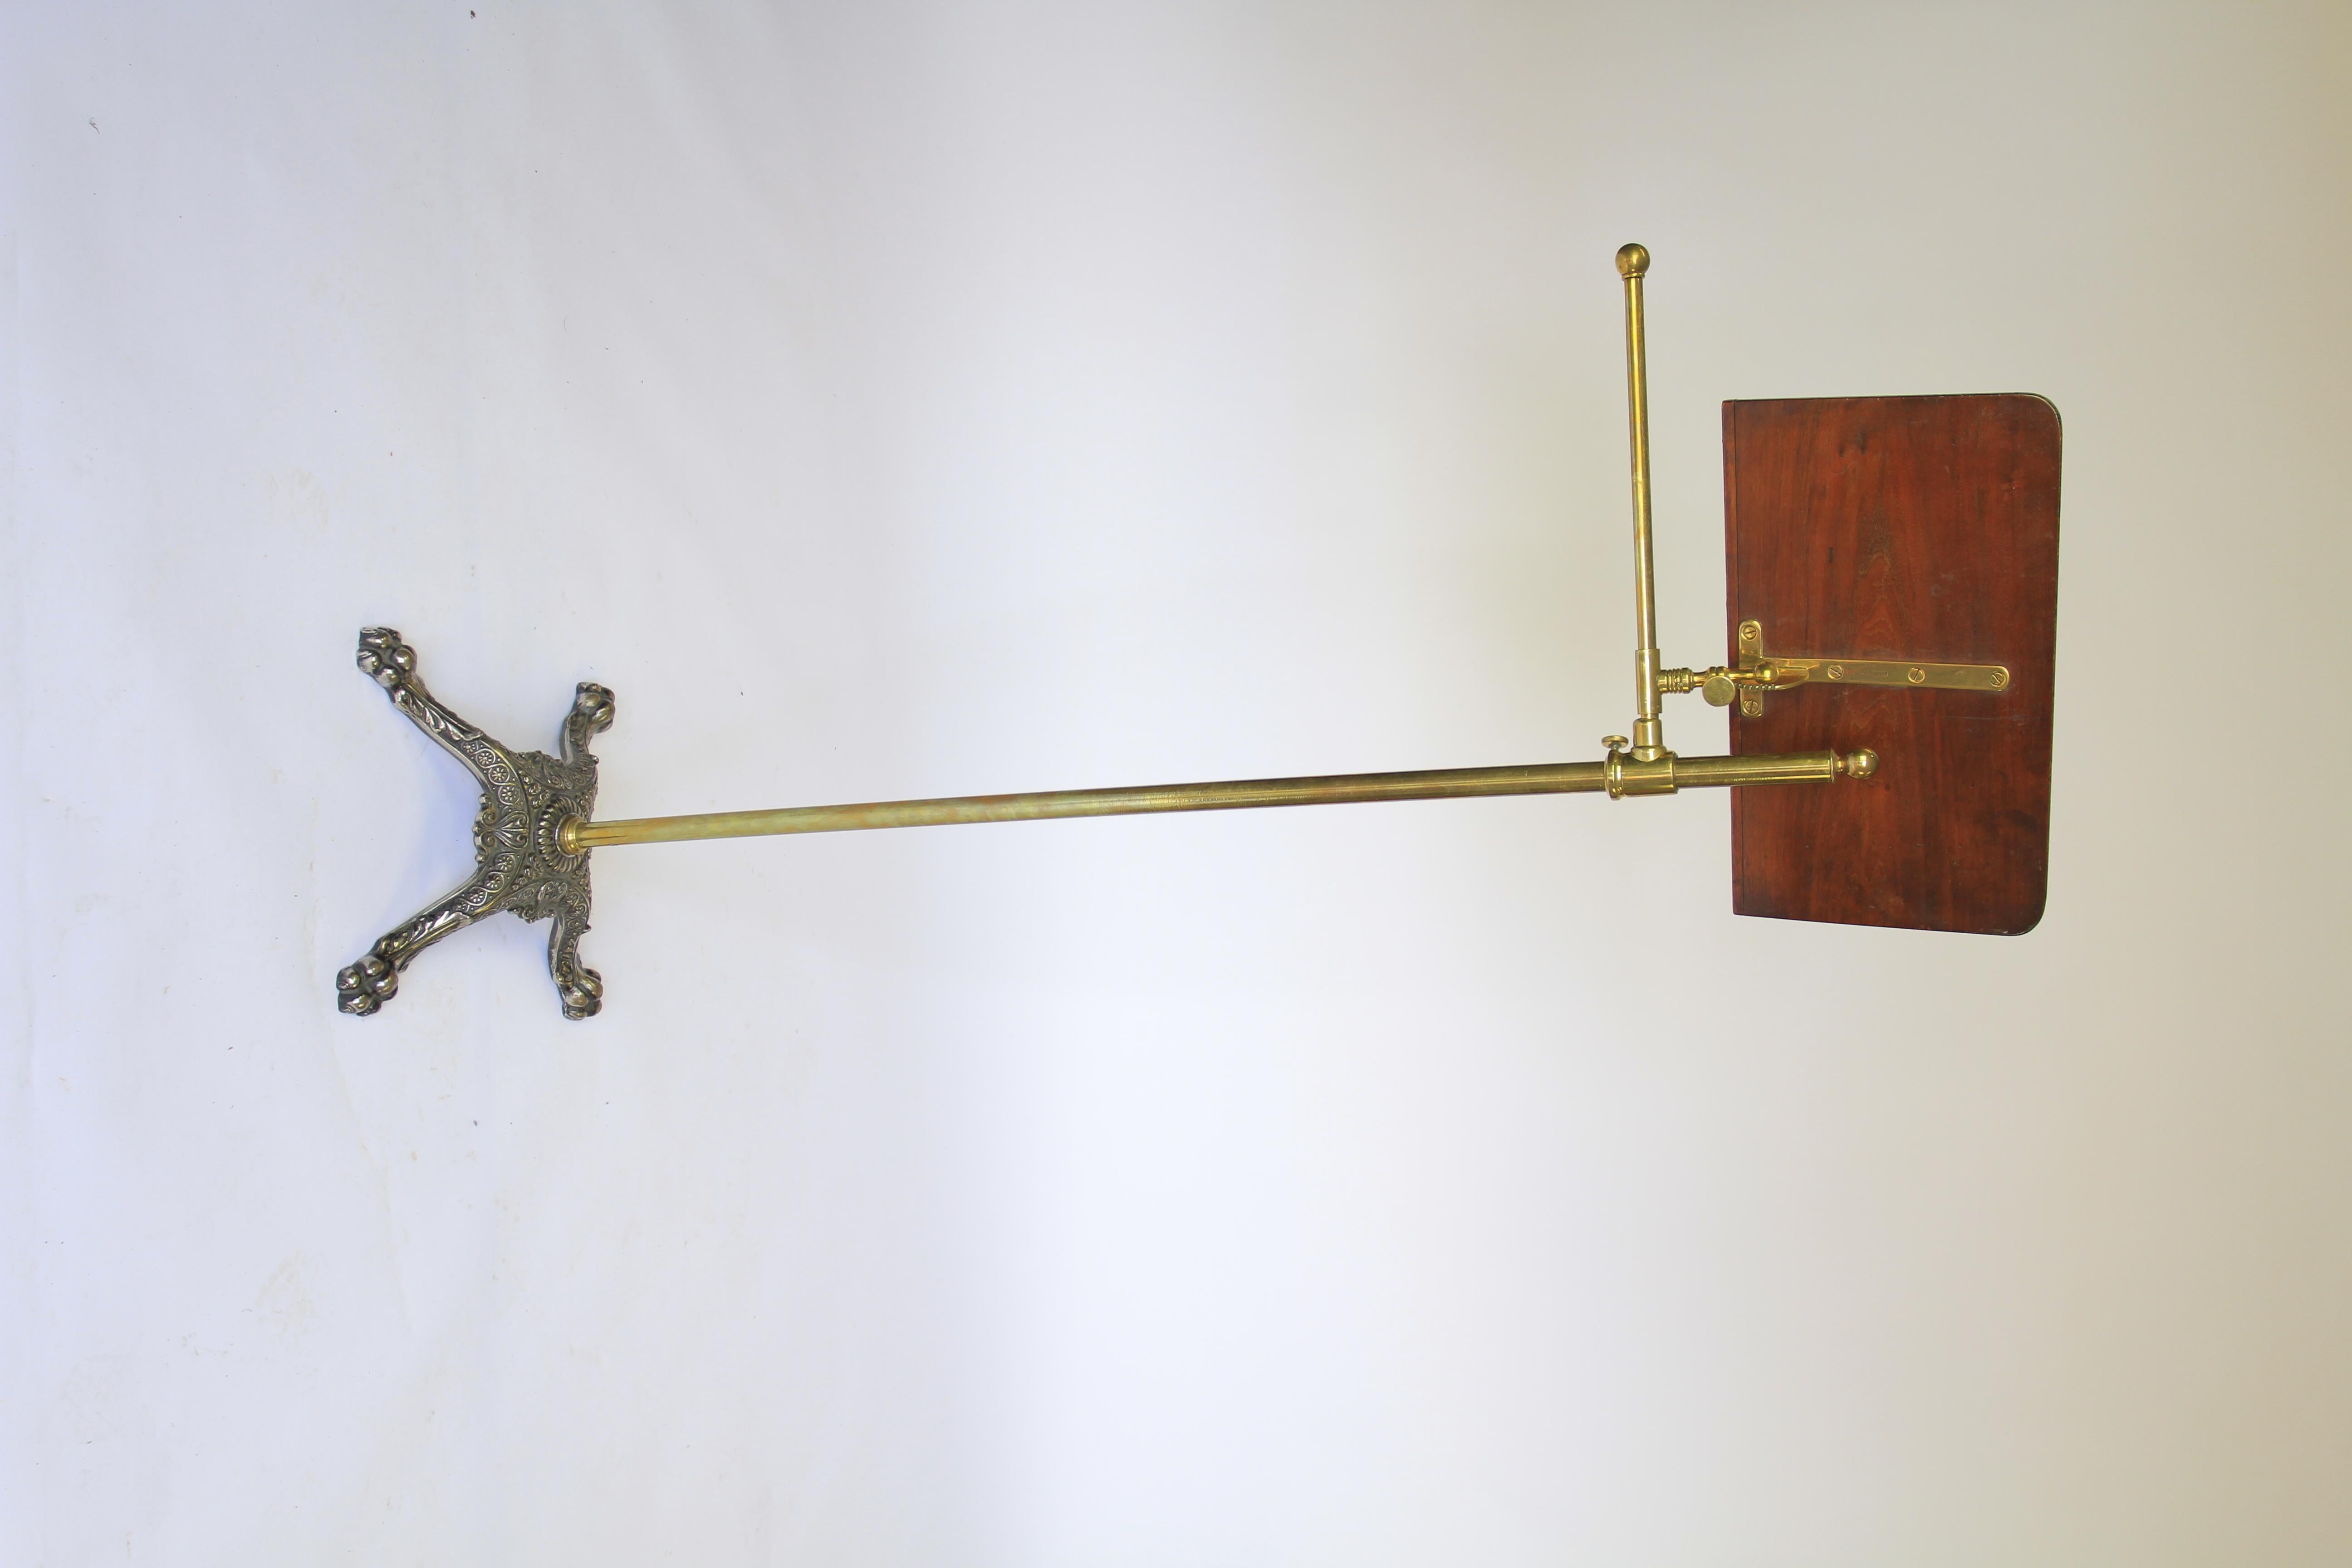 Victorian Brass & iron reading stand with Mahogany lectern
Brass pole with screw top  ball finial
Brass D shape arm holding Mahogany lectern,
sliding action , &  pinch screw  adjusting tilting action on lectern
Pair Brass book rests on front of